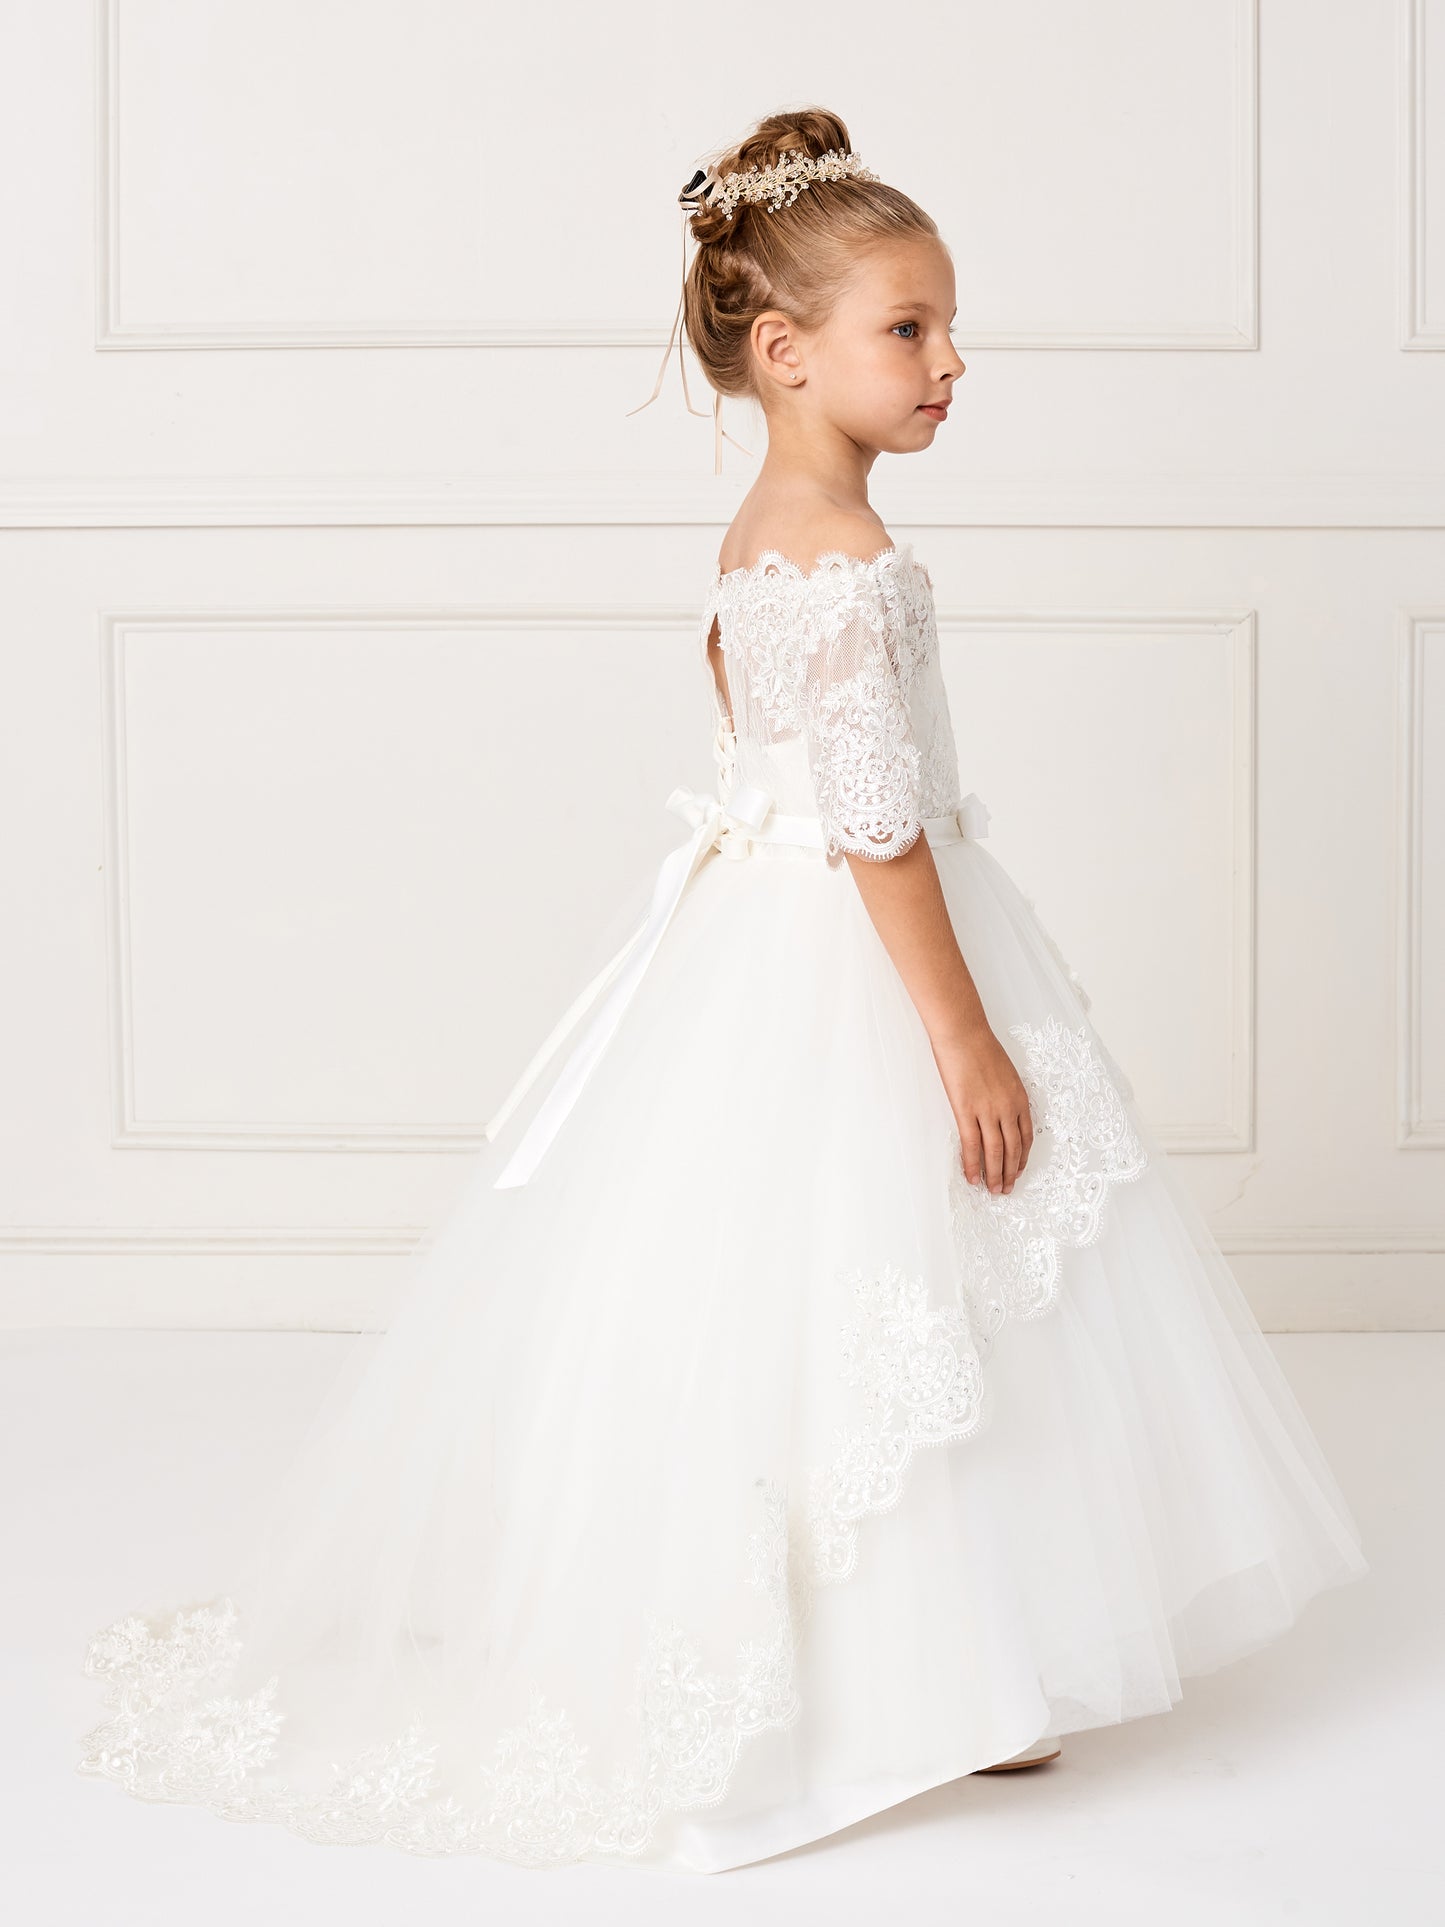 This gorgeous off shoulder dress is perfect for your little girl. The center of the dress has a simple bow at the waist.This dress features a lace peplum skirt with a long train on the back that has beautiful embroidered details. Skirt has additional netting crinoline underneath that can be puffed up if extra fullness is desired. Fully lined, zipper back, and satin sash tie-back.  Available Size: 4  Available Color: Ivory